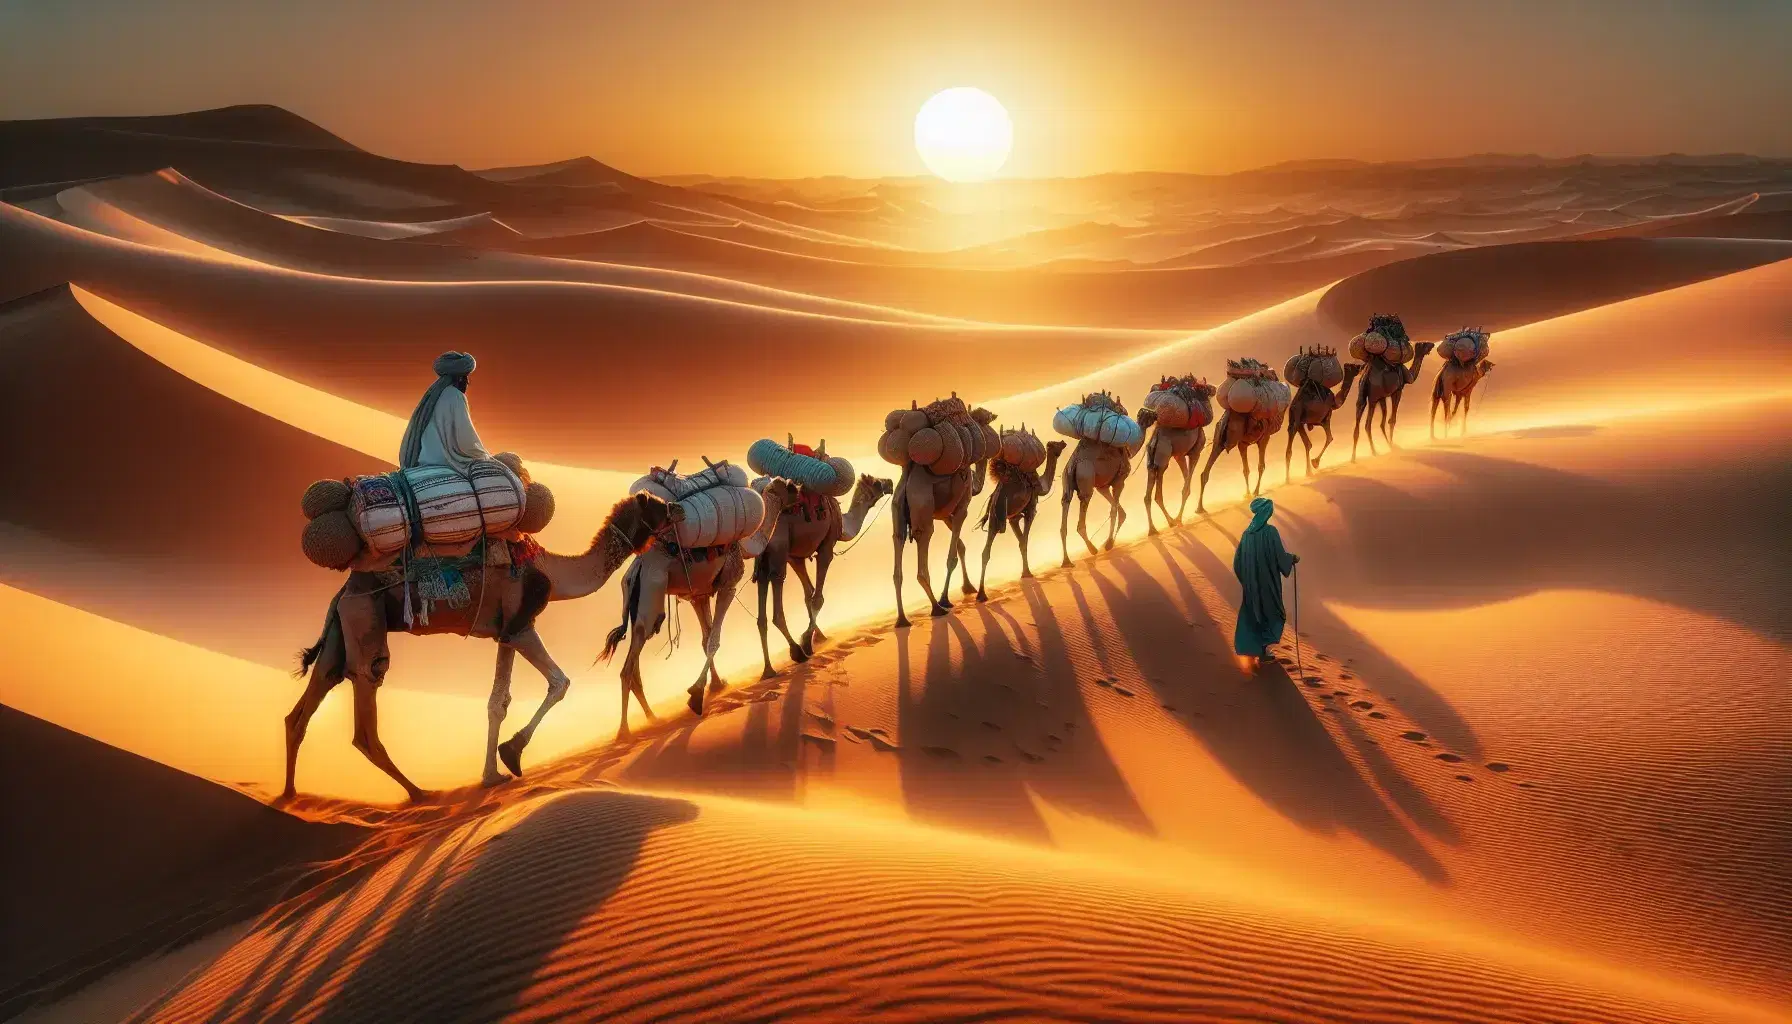 Sunset-lit desert scene with a camel caravan led by a robed figure, casting long shadows on dunes, under a gradient sky.